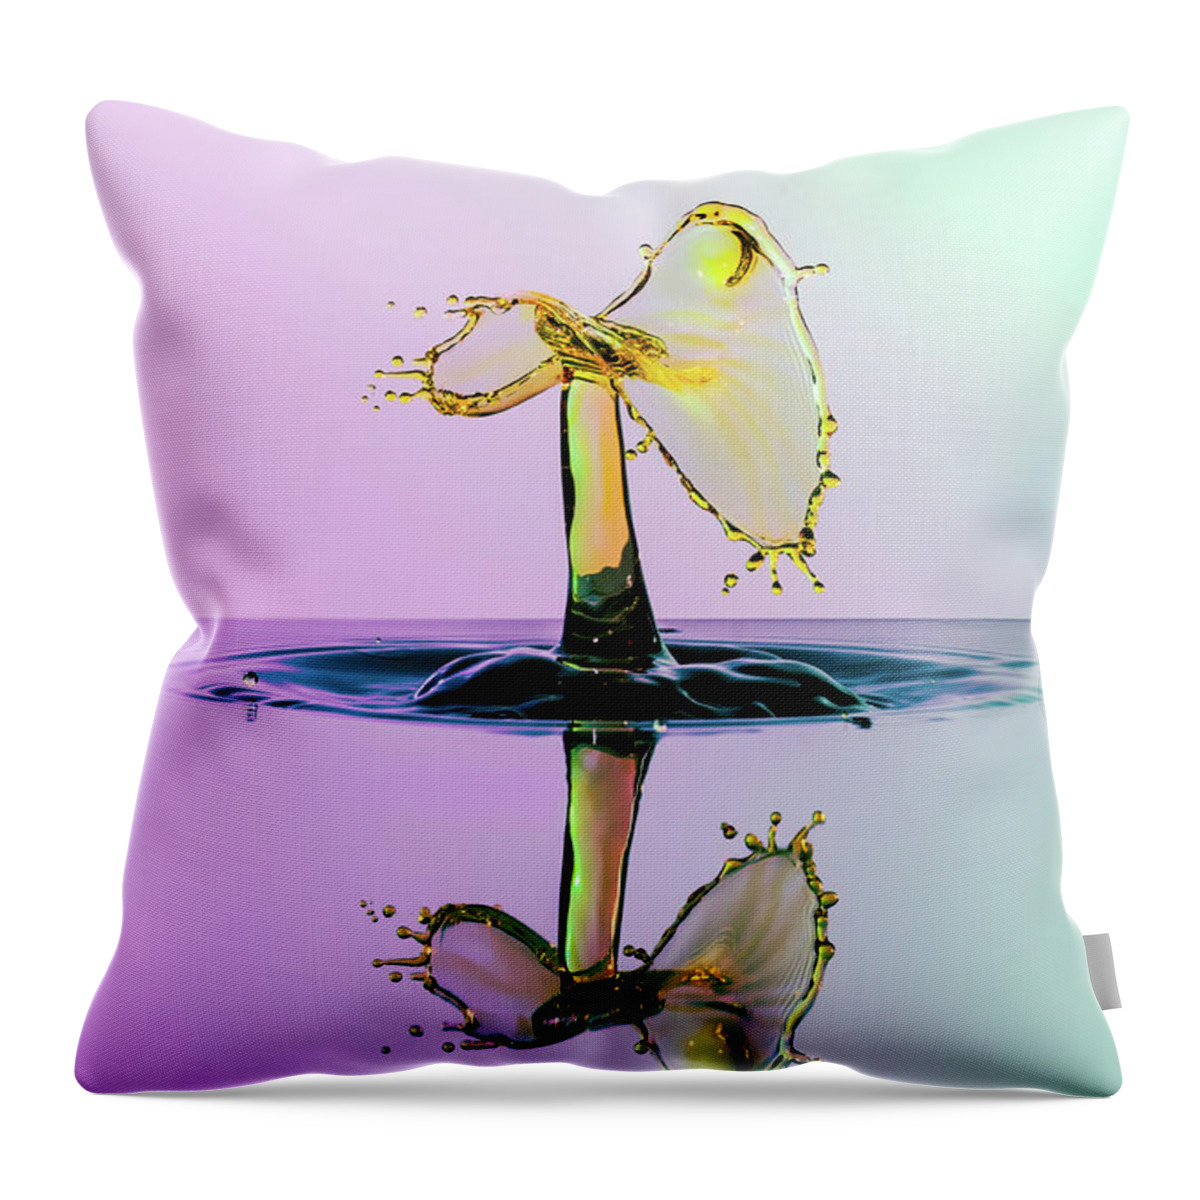 Abstract Throw Pillow featuring the photograph The Twister by Sue Leonard